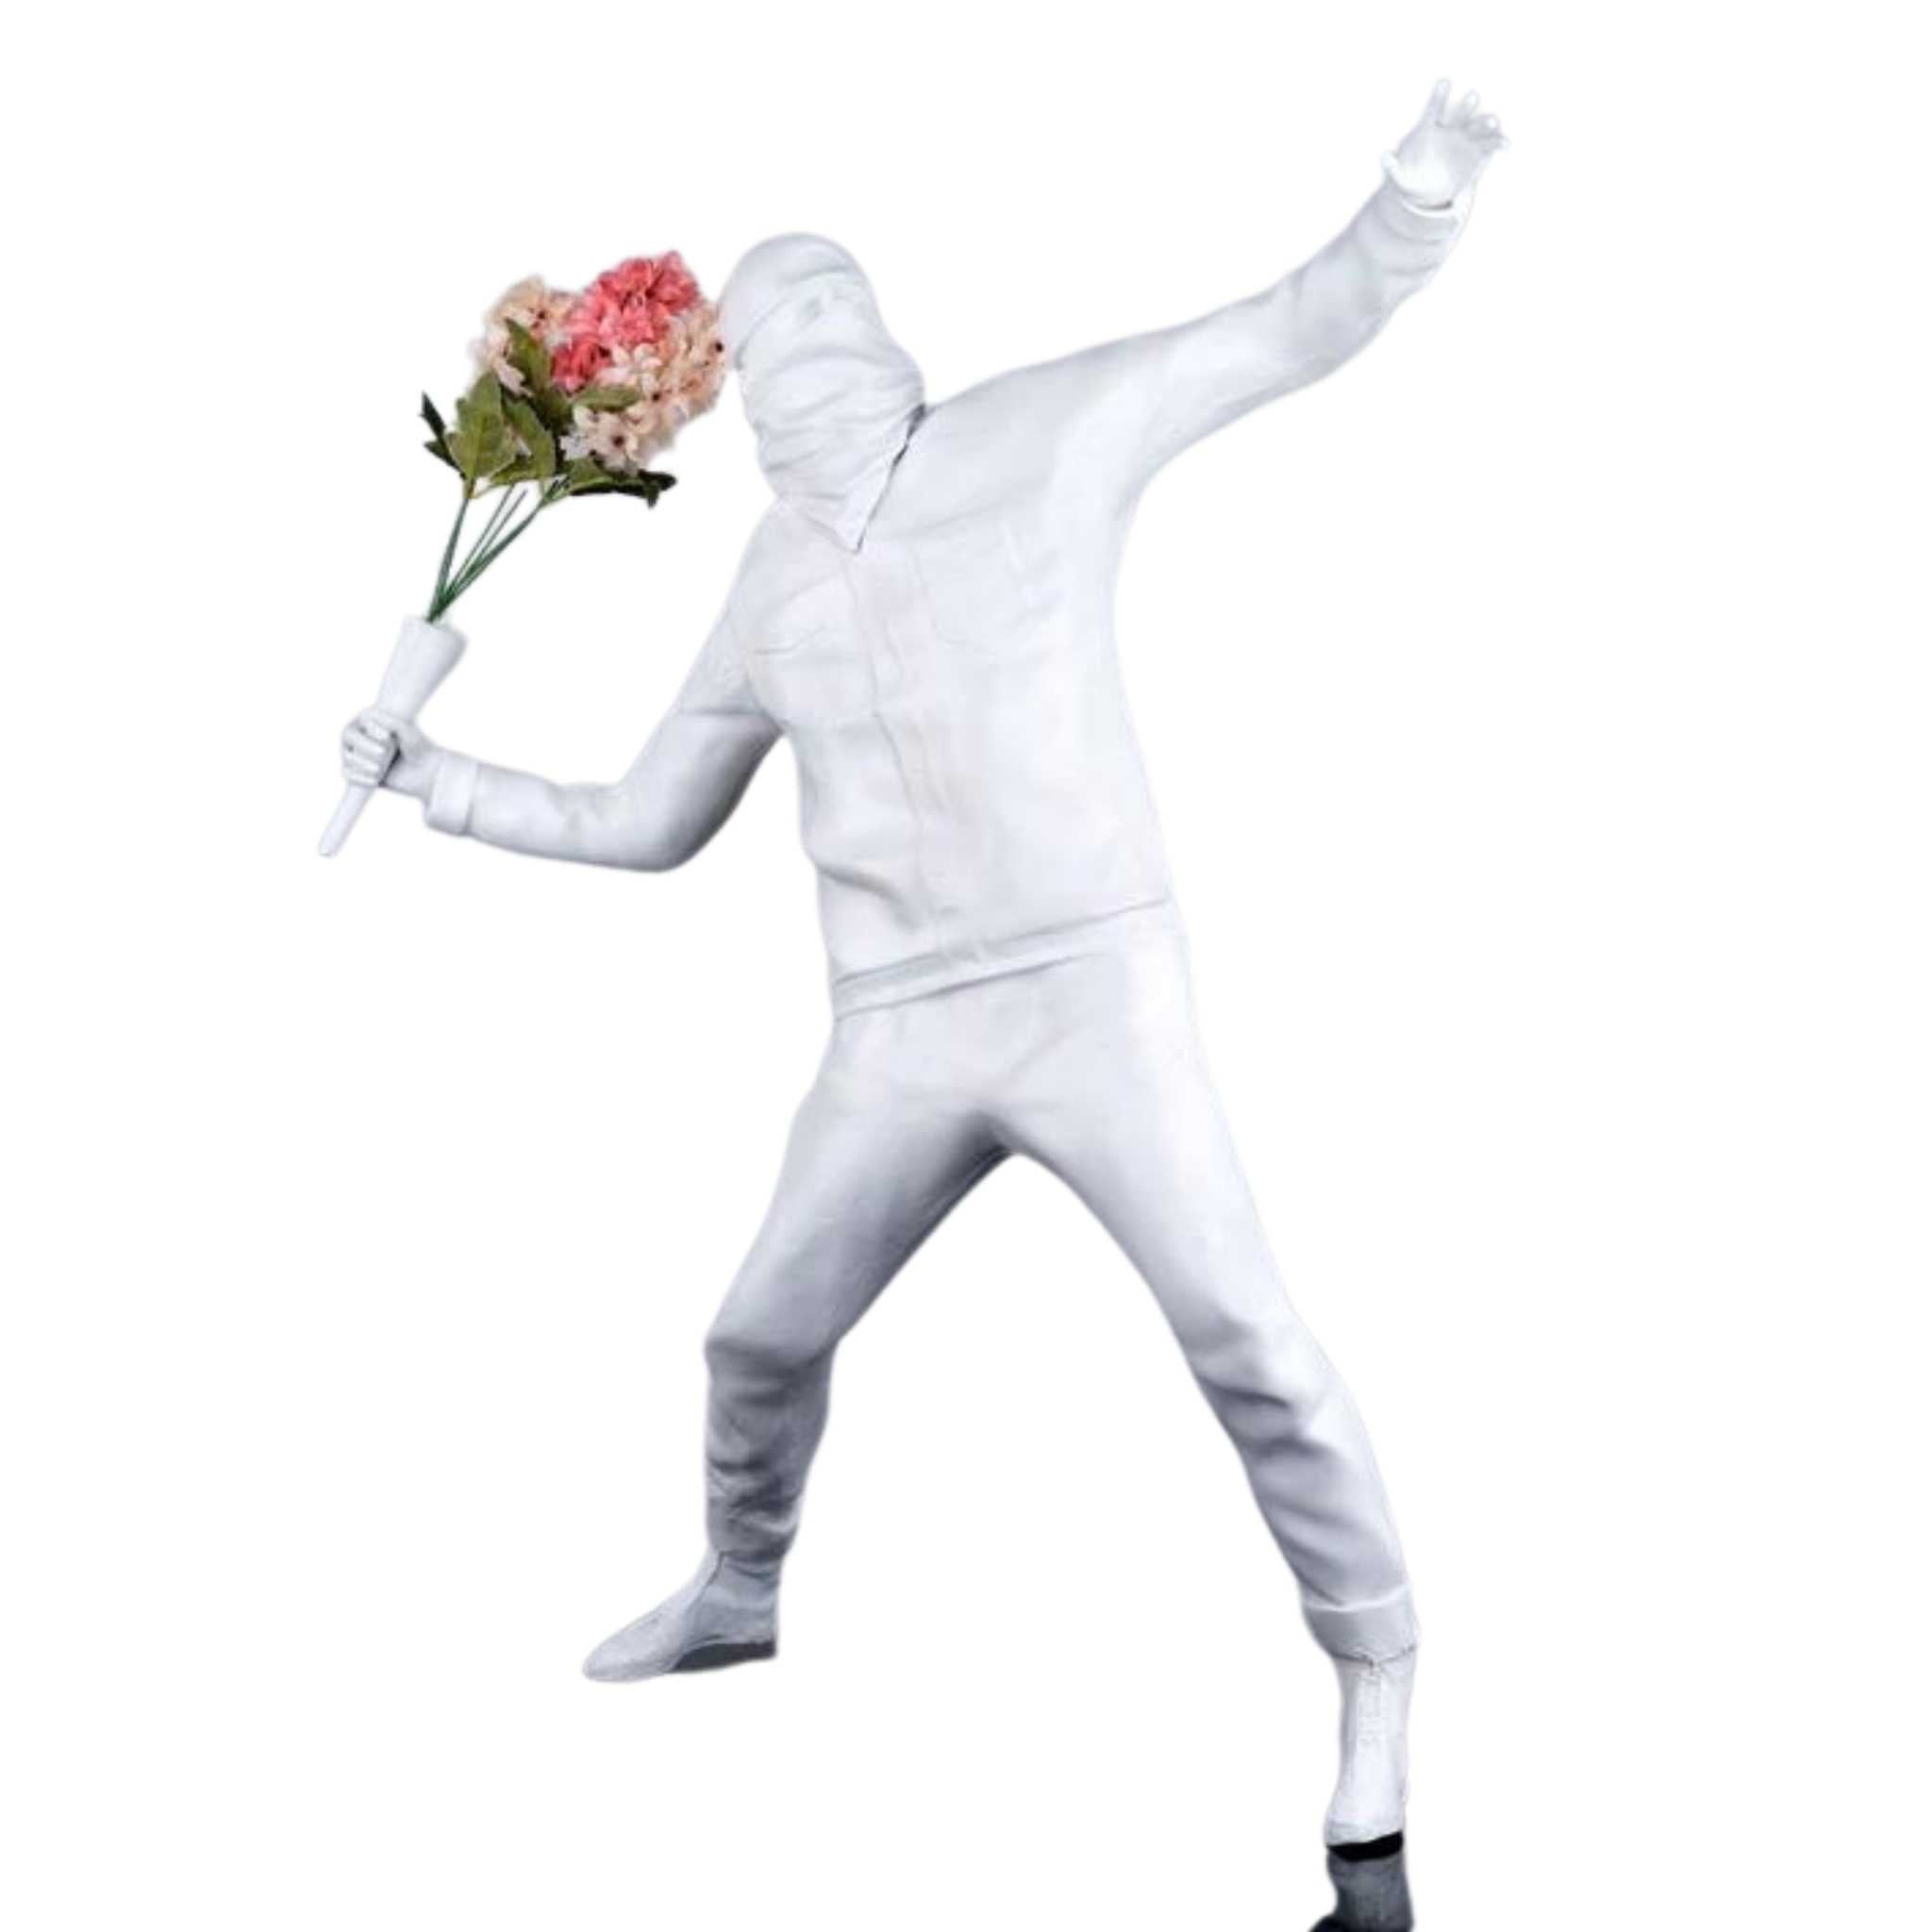 Flower Power: The Banksy Sculpture with Throwing Man